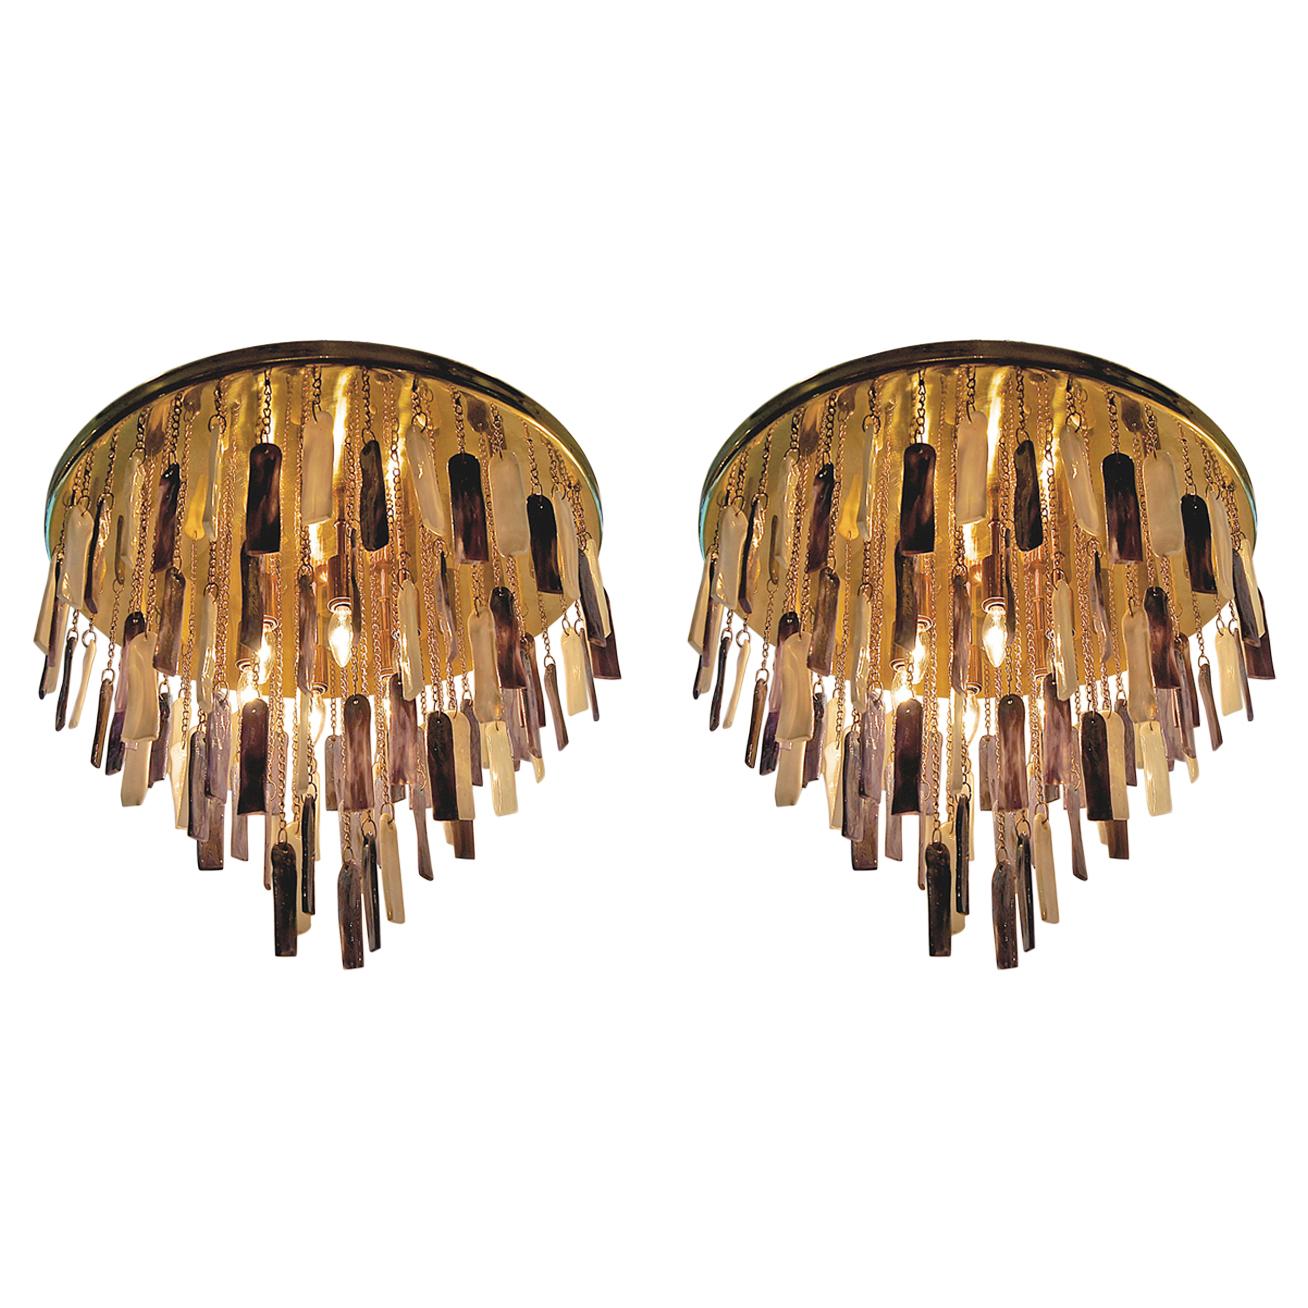 Pair of Moderne Light Fixtures with Glass Pendants, Sold Individually